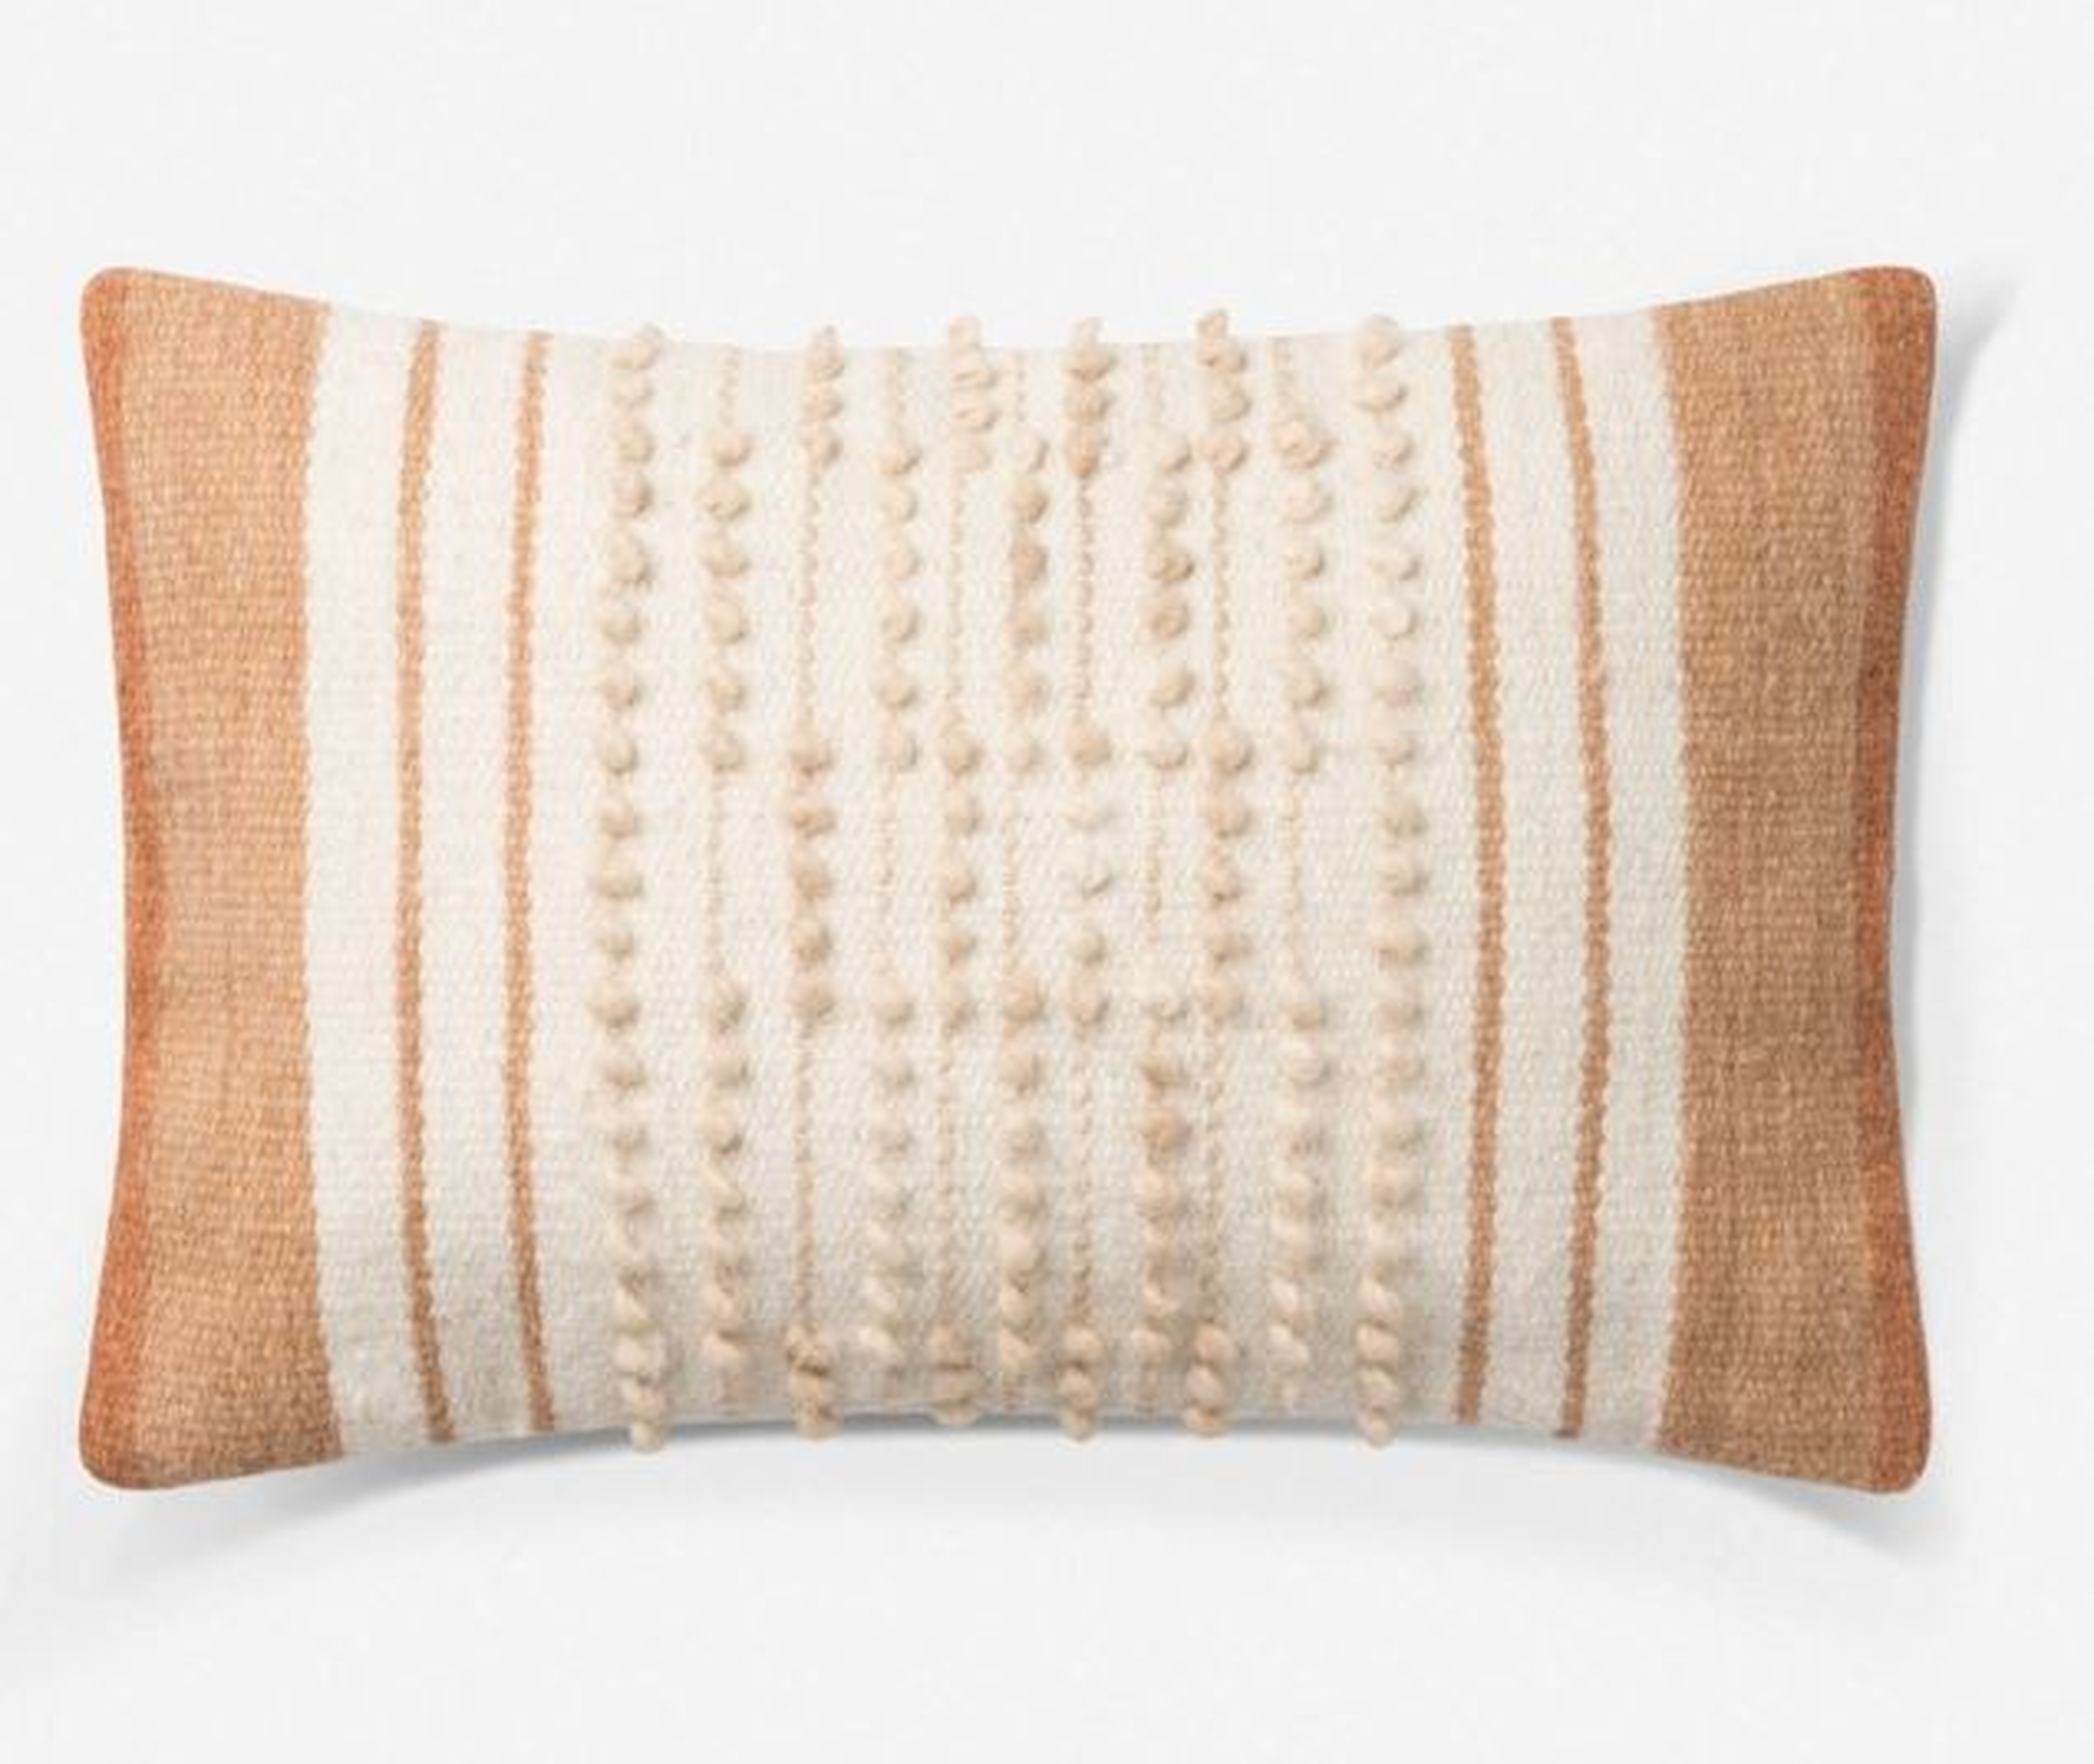 Oise Lumbar Pillow, Rust and Natural, ED Ellen DeGeneres Crafted by Loloi - Lulu and Georgia